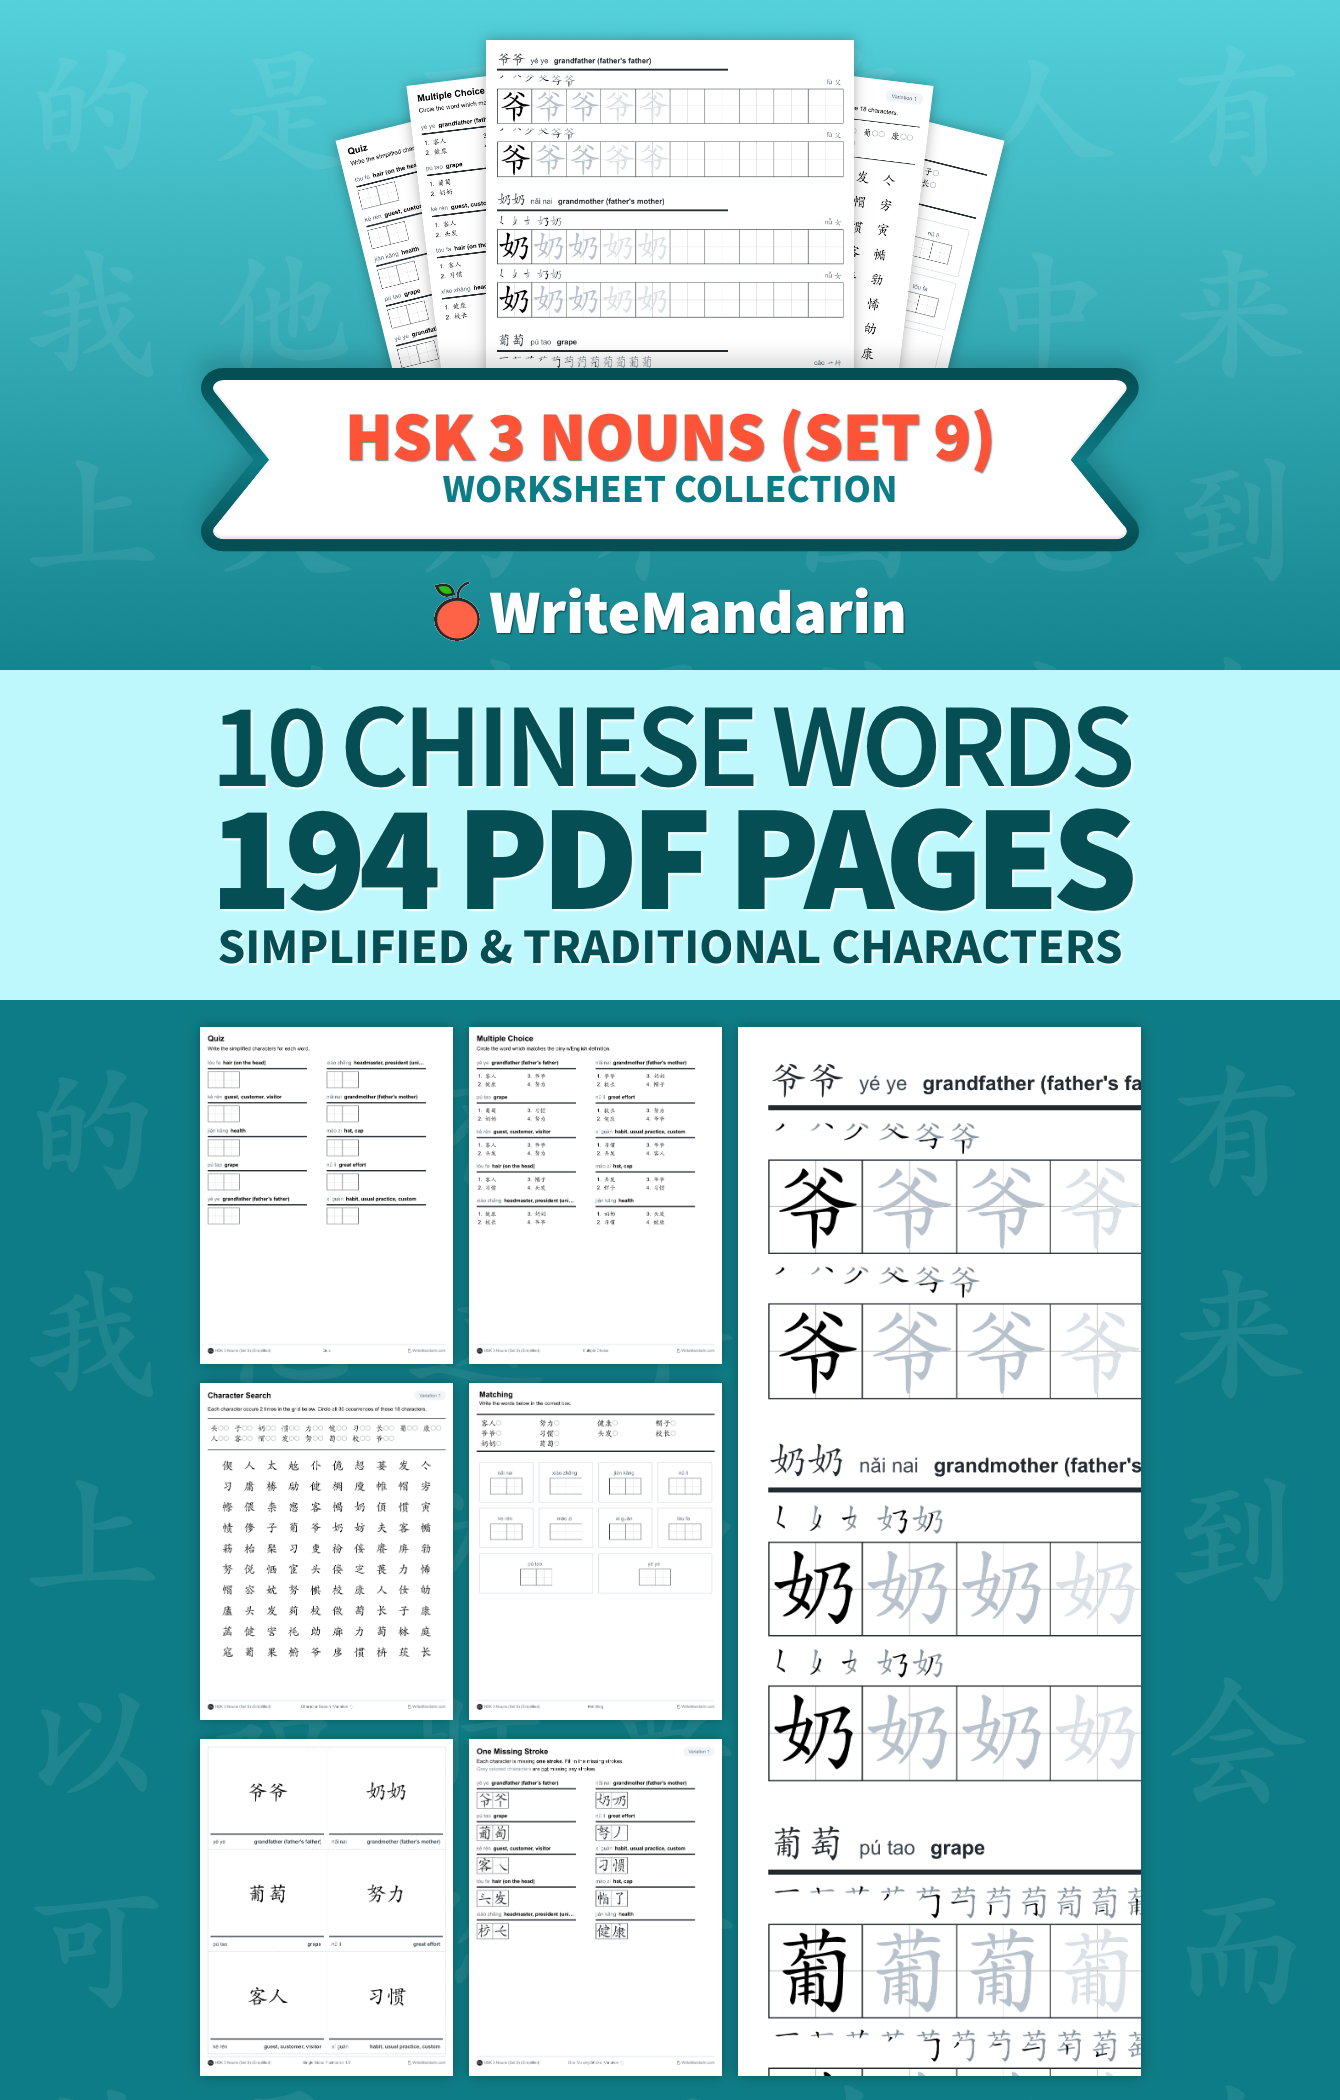 Preview image of HSK 3 Nouns (Set 9) worksheet collection